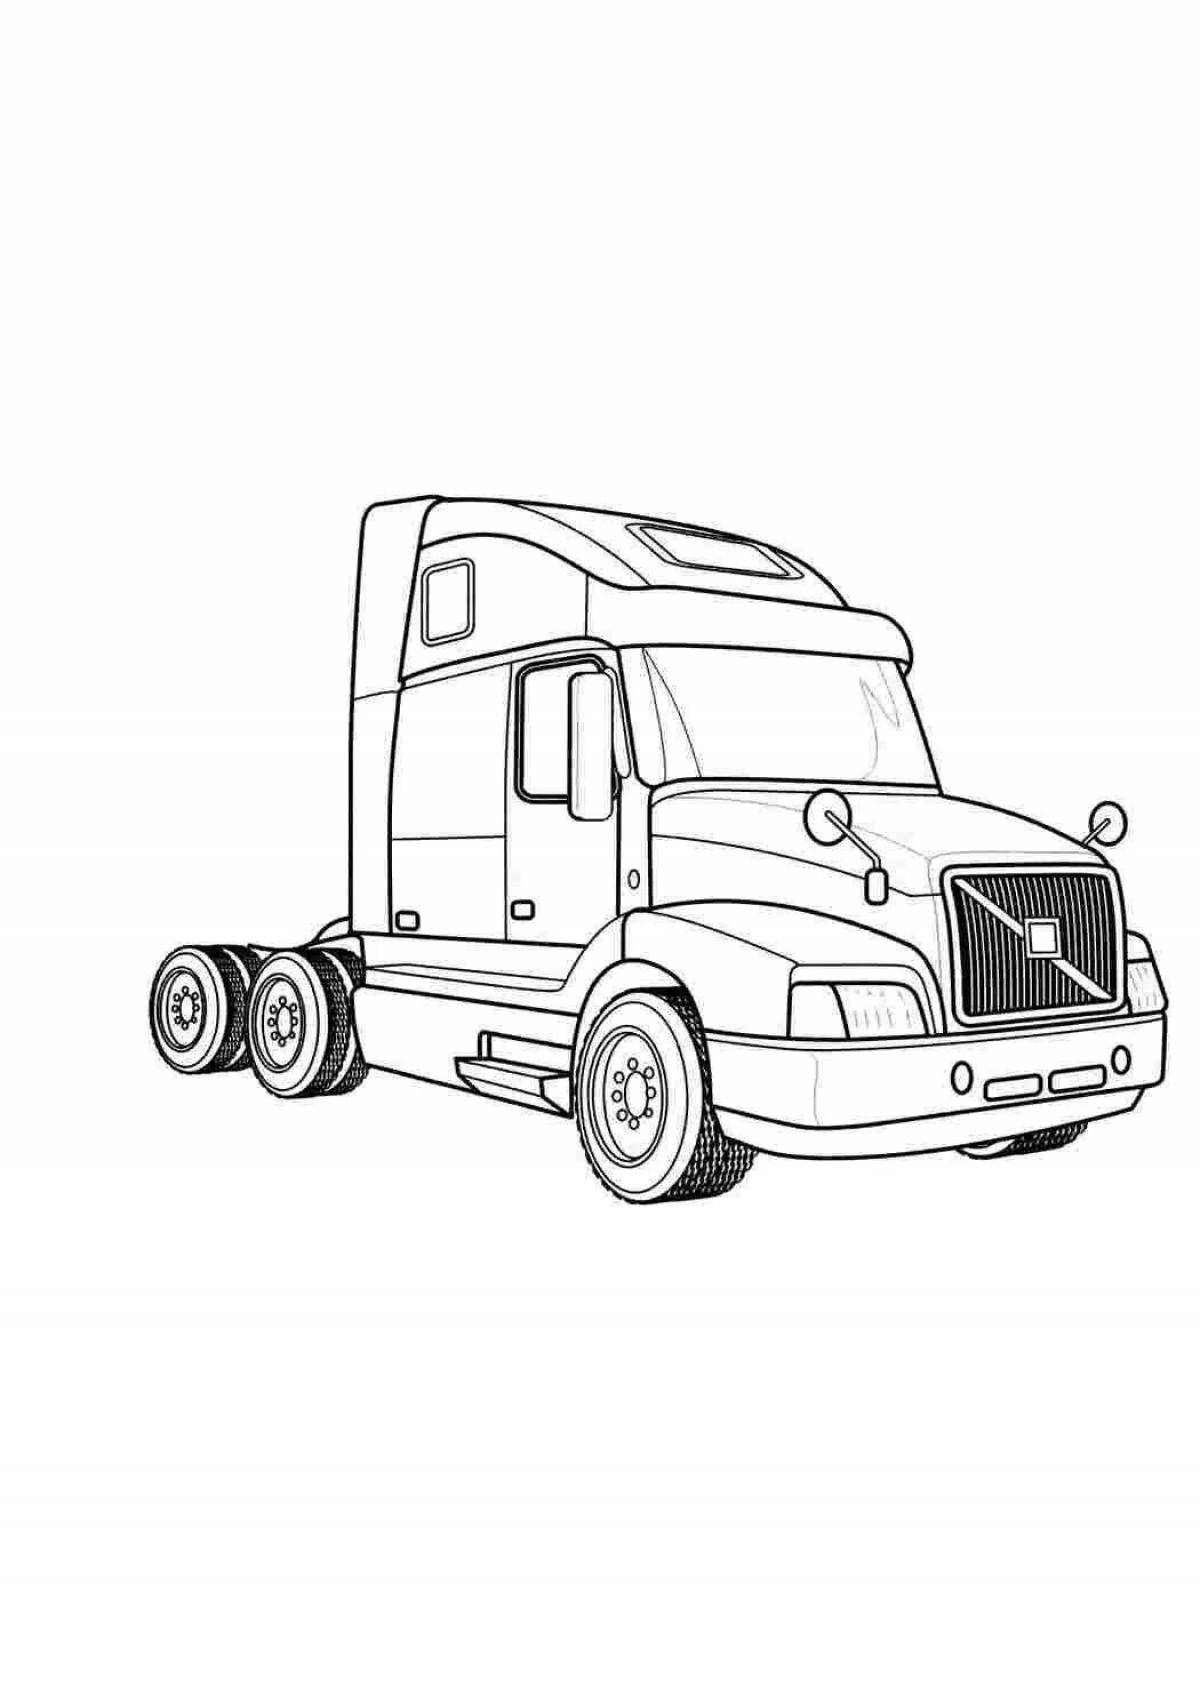 Coloring page fancy volvo truck